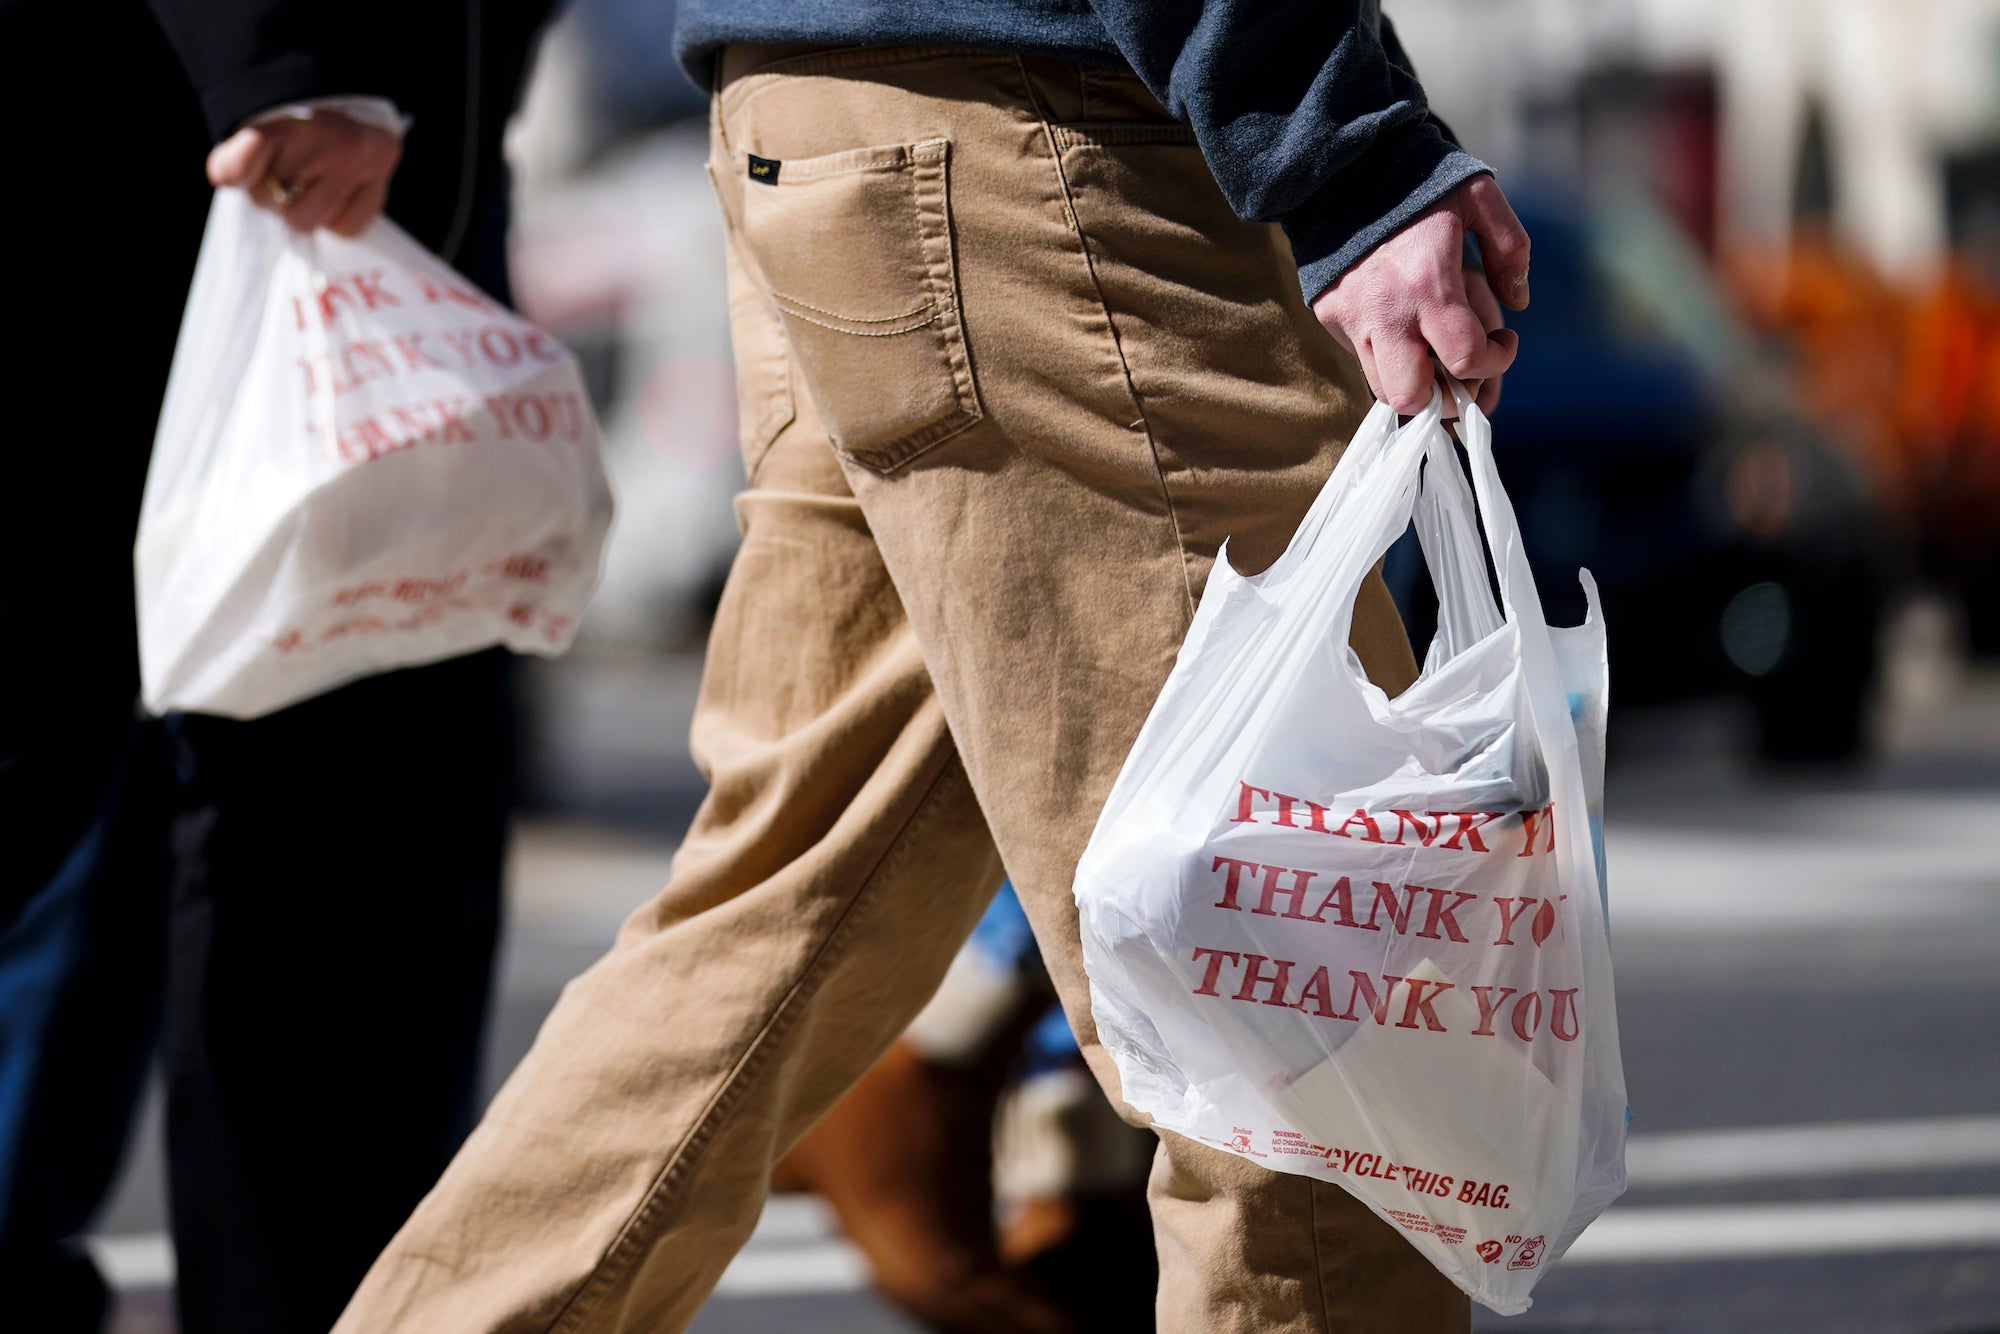 Philly's plastic bag ban is working, study concludes - WHYY